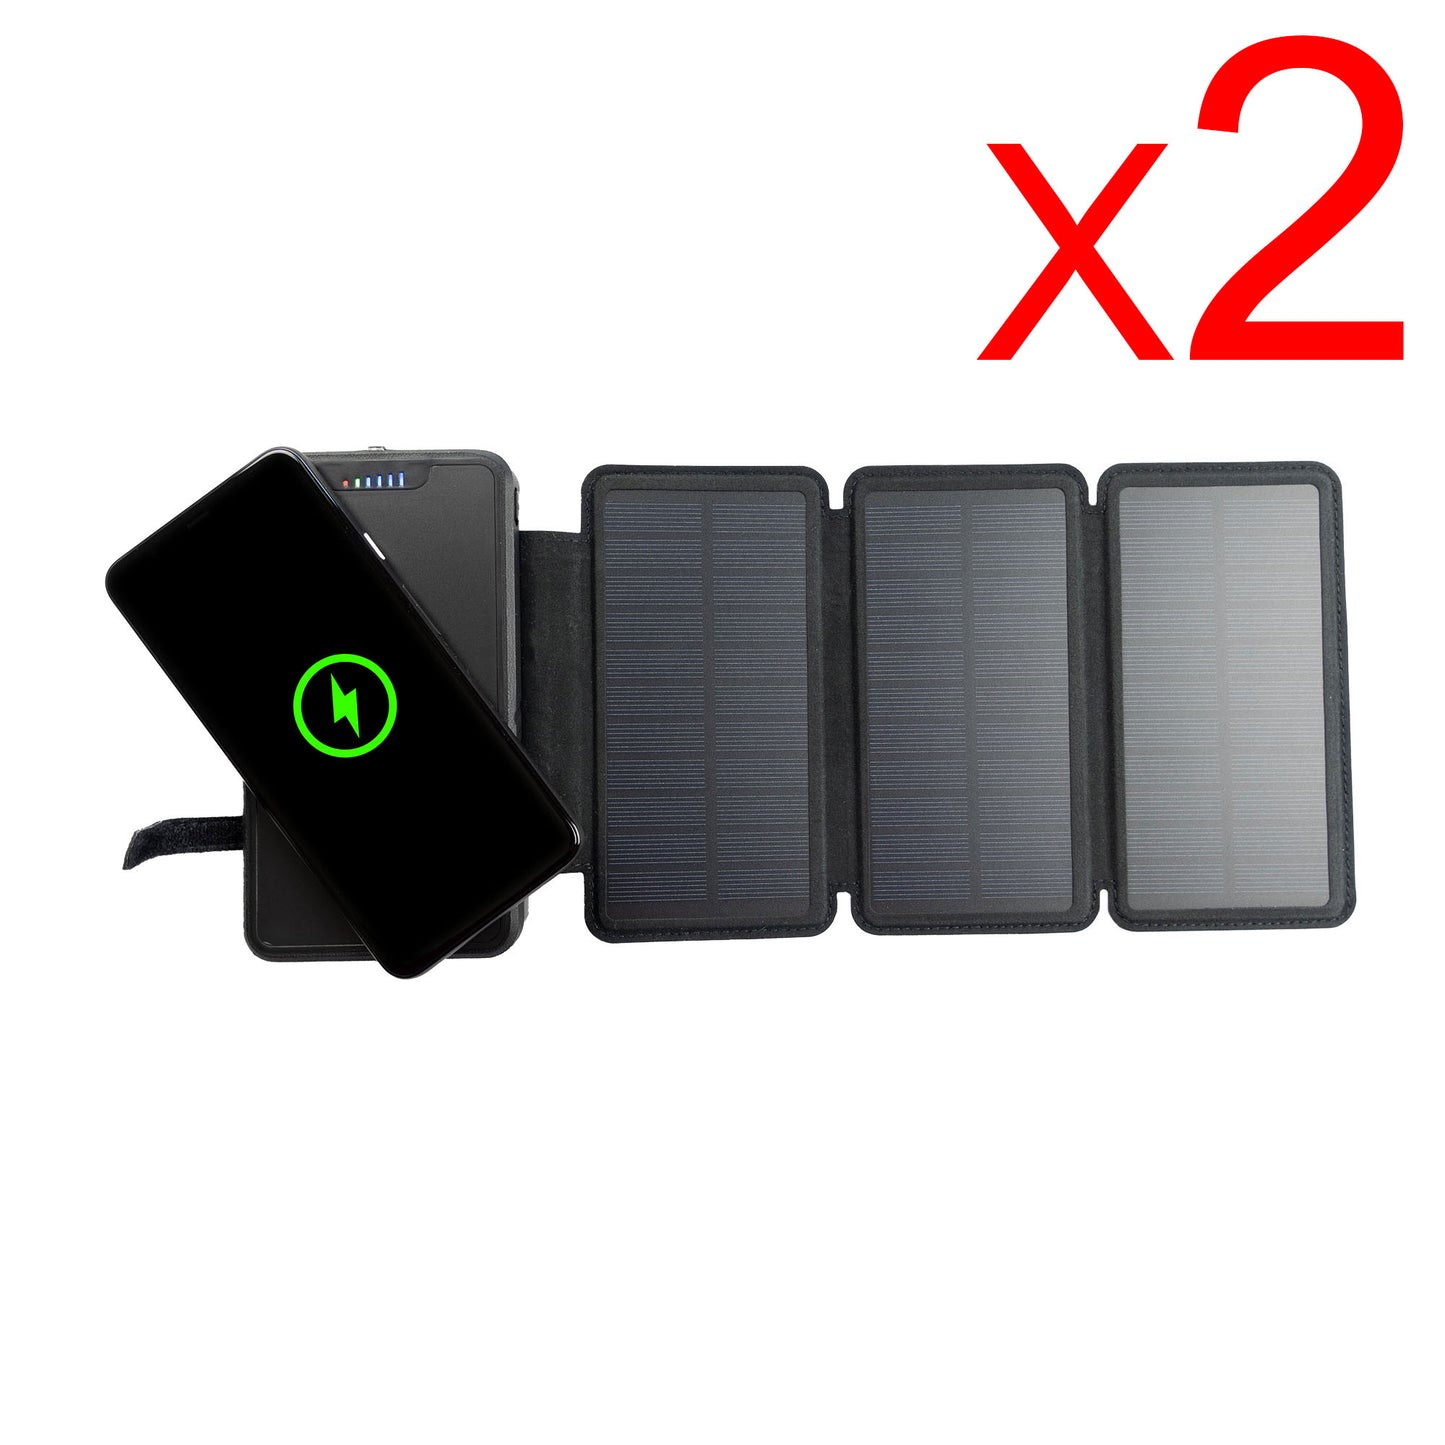 [ Pack of 2 ] Tough Light 820W 3 Panel USB Solar Power Bank Charger - 20,000mAh Li Polymer with WIRELESS Phone Charging - 2AMP High Speed Cable Included